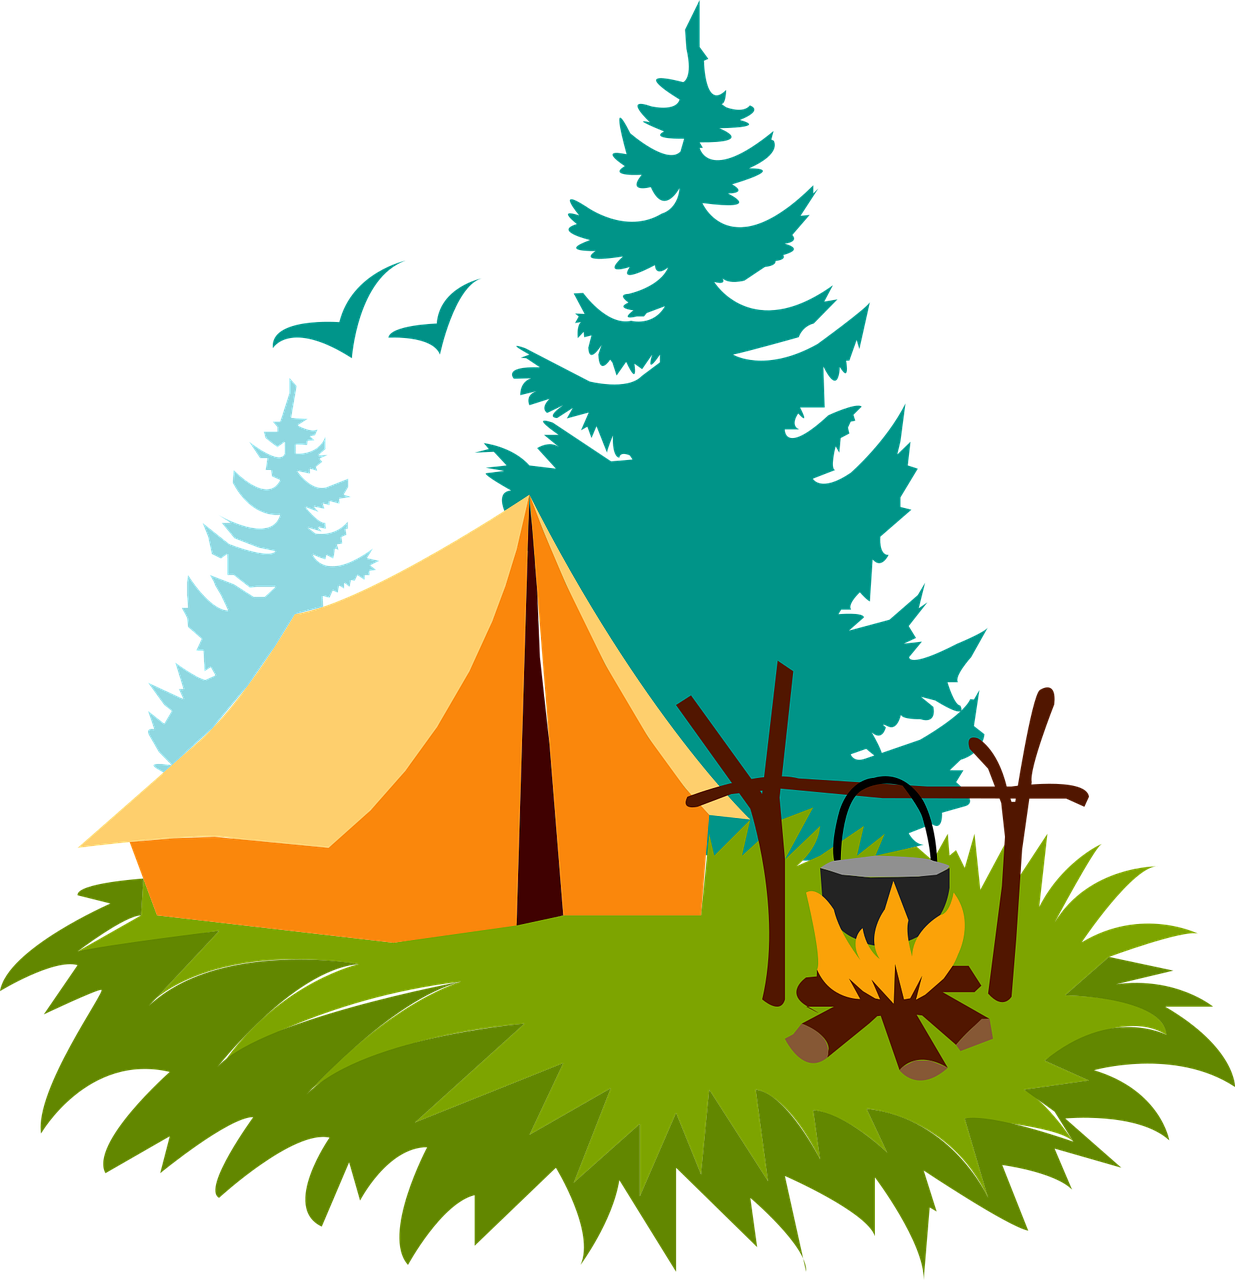 Discover the beauty of nature and explore the great outdoors through camping.